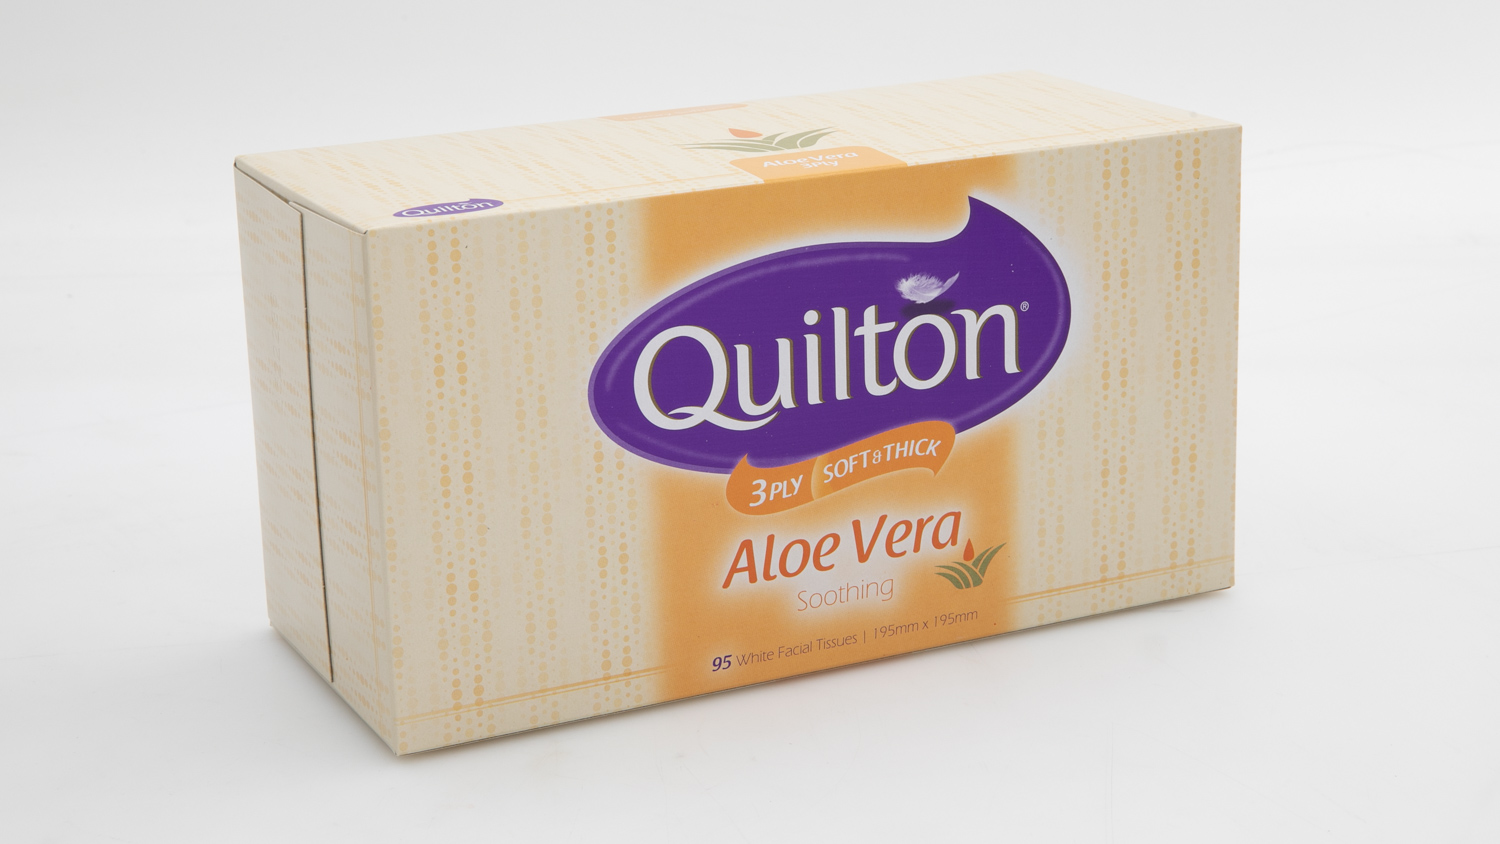 Quilton Aloe Vera Soothing 3 Ply Soft & Thick 95 tissues carousel image